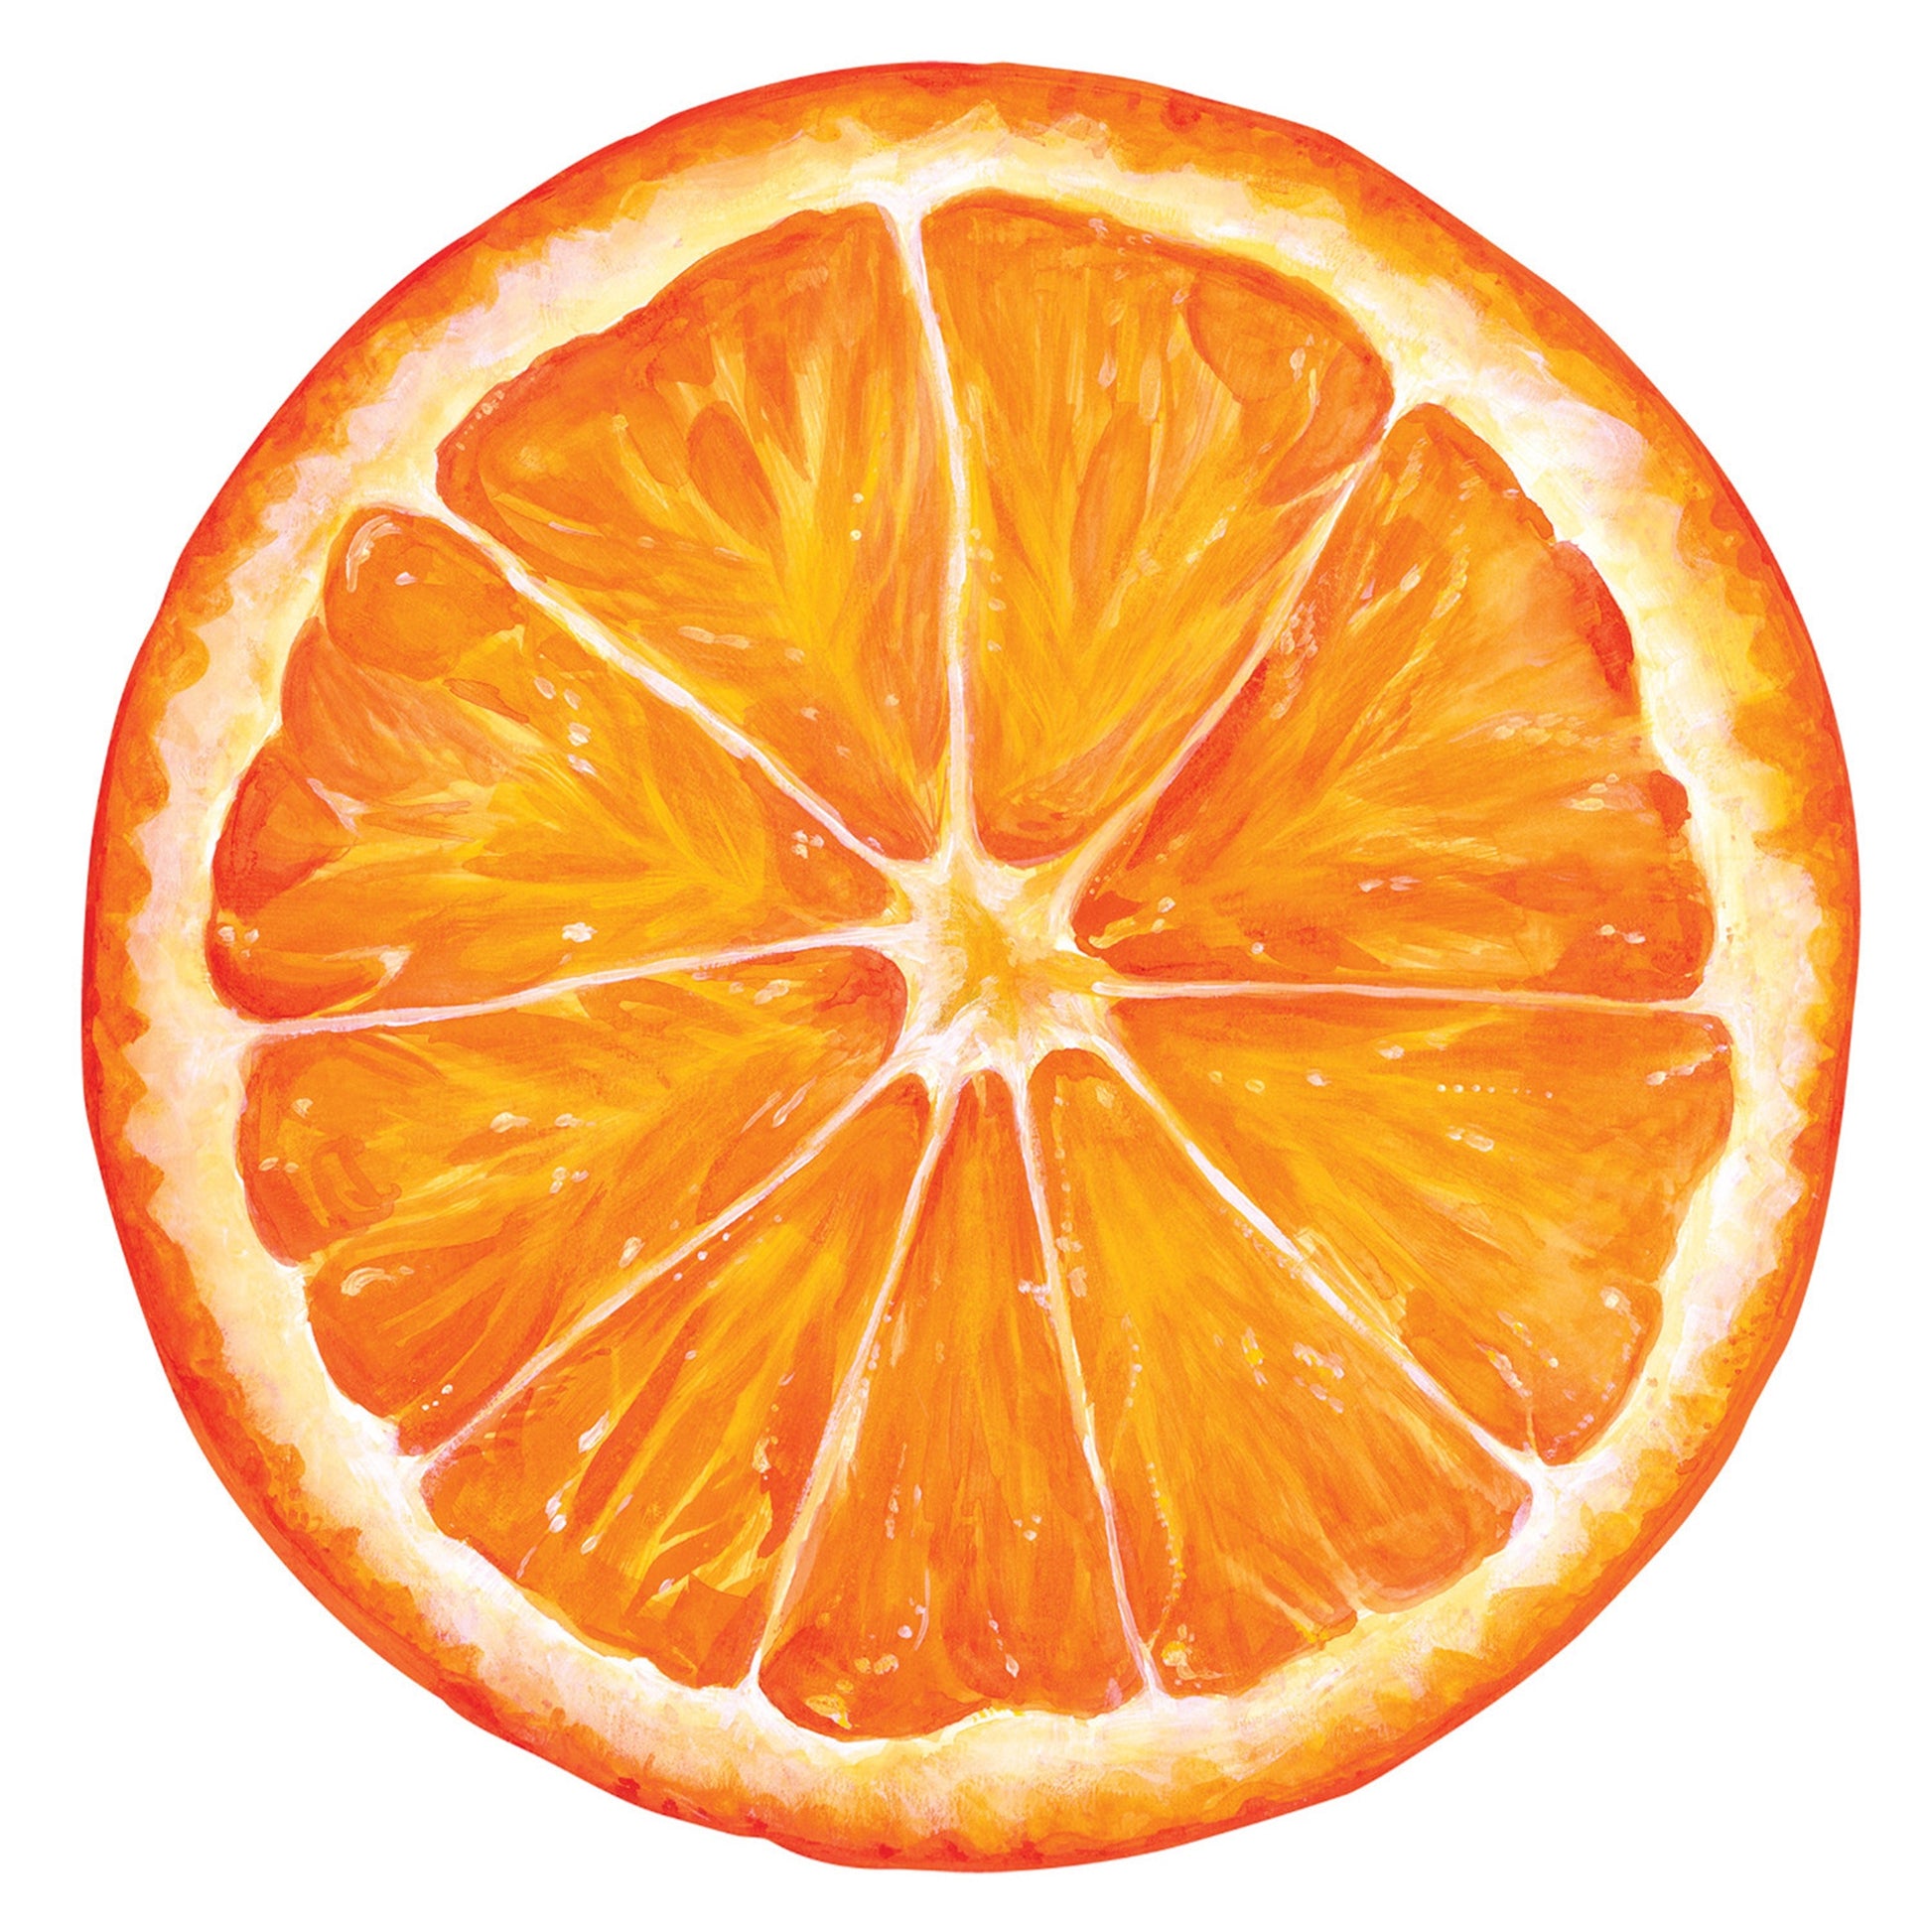 A lovely Orange Slice image for a paper placemat.